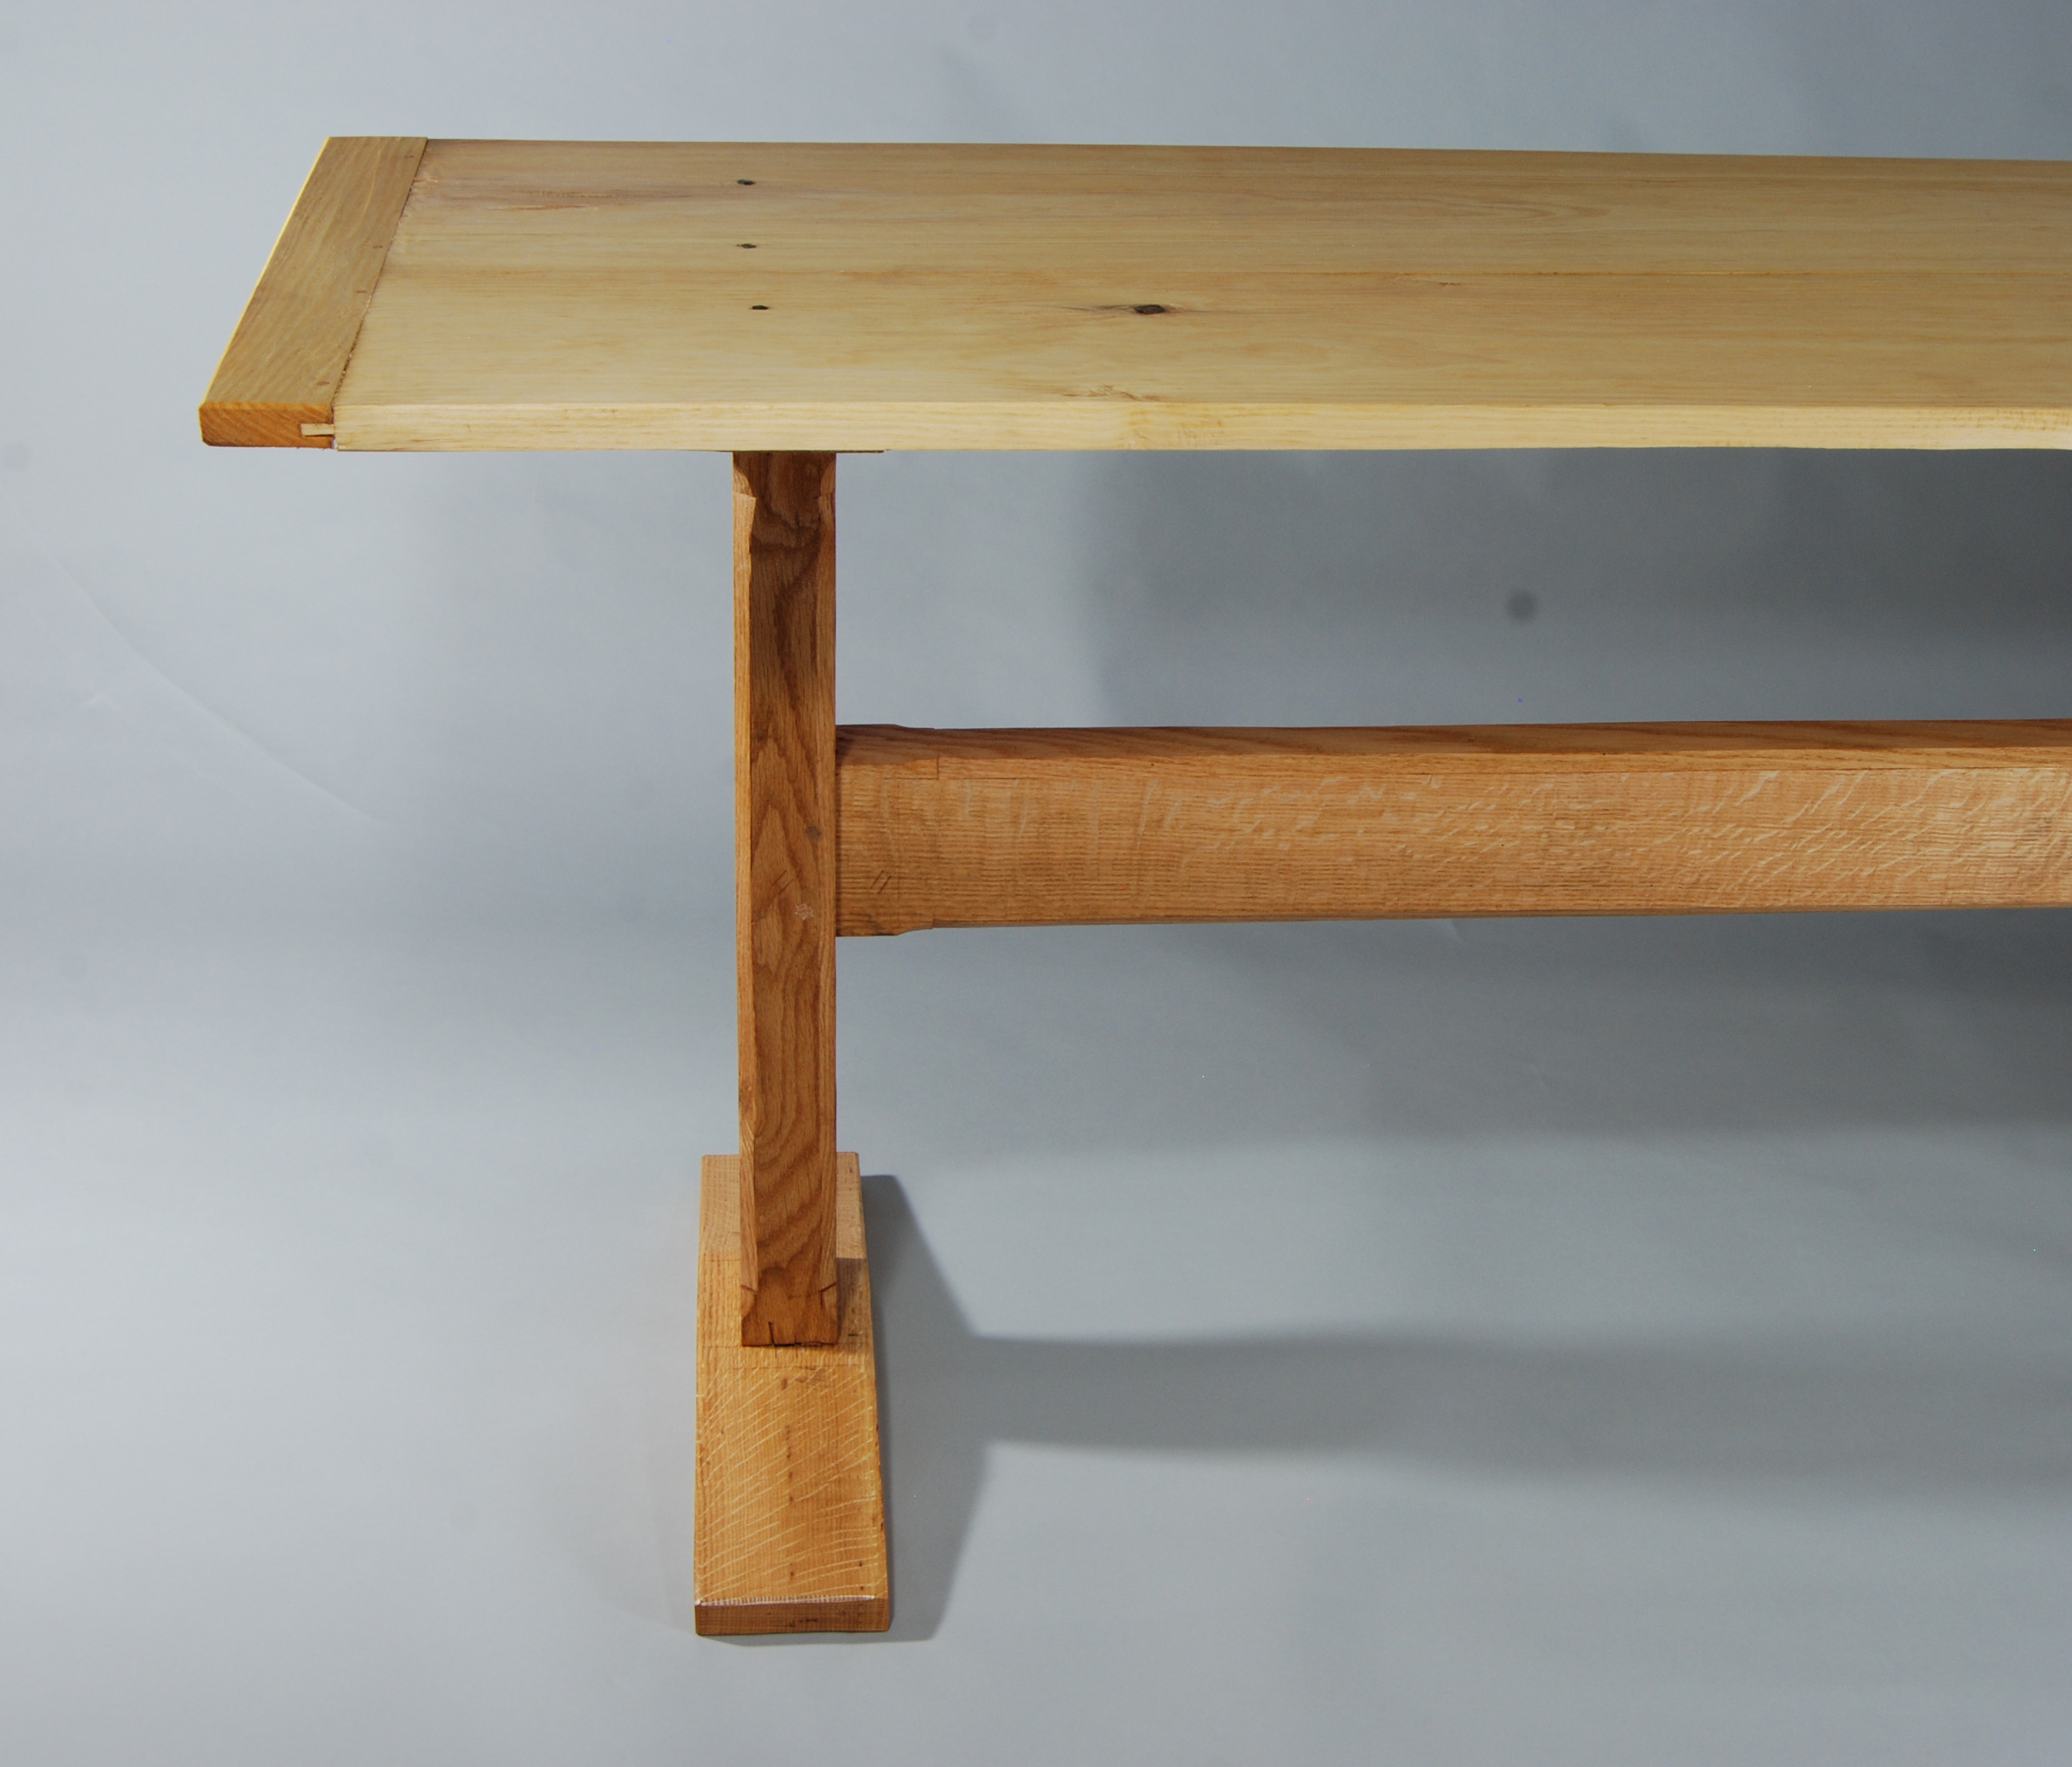 trestle table | Peter Follansbee, joiner's notes